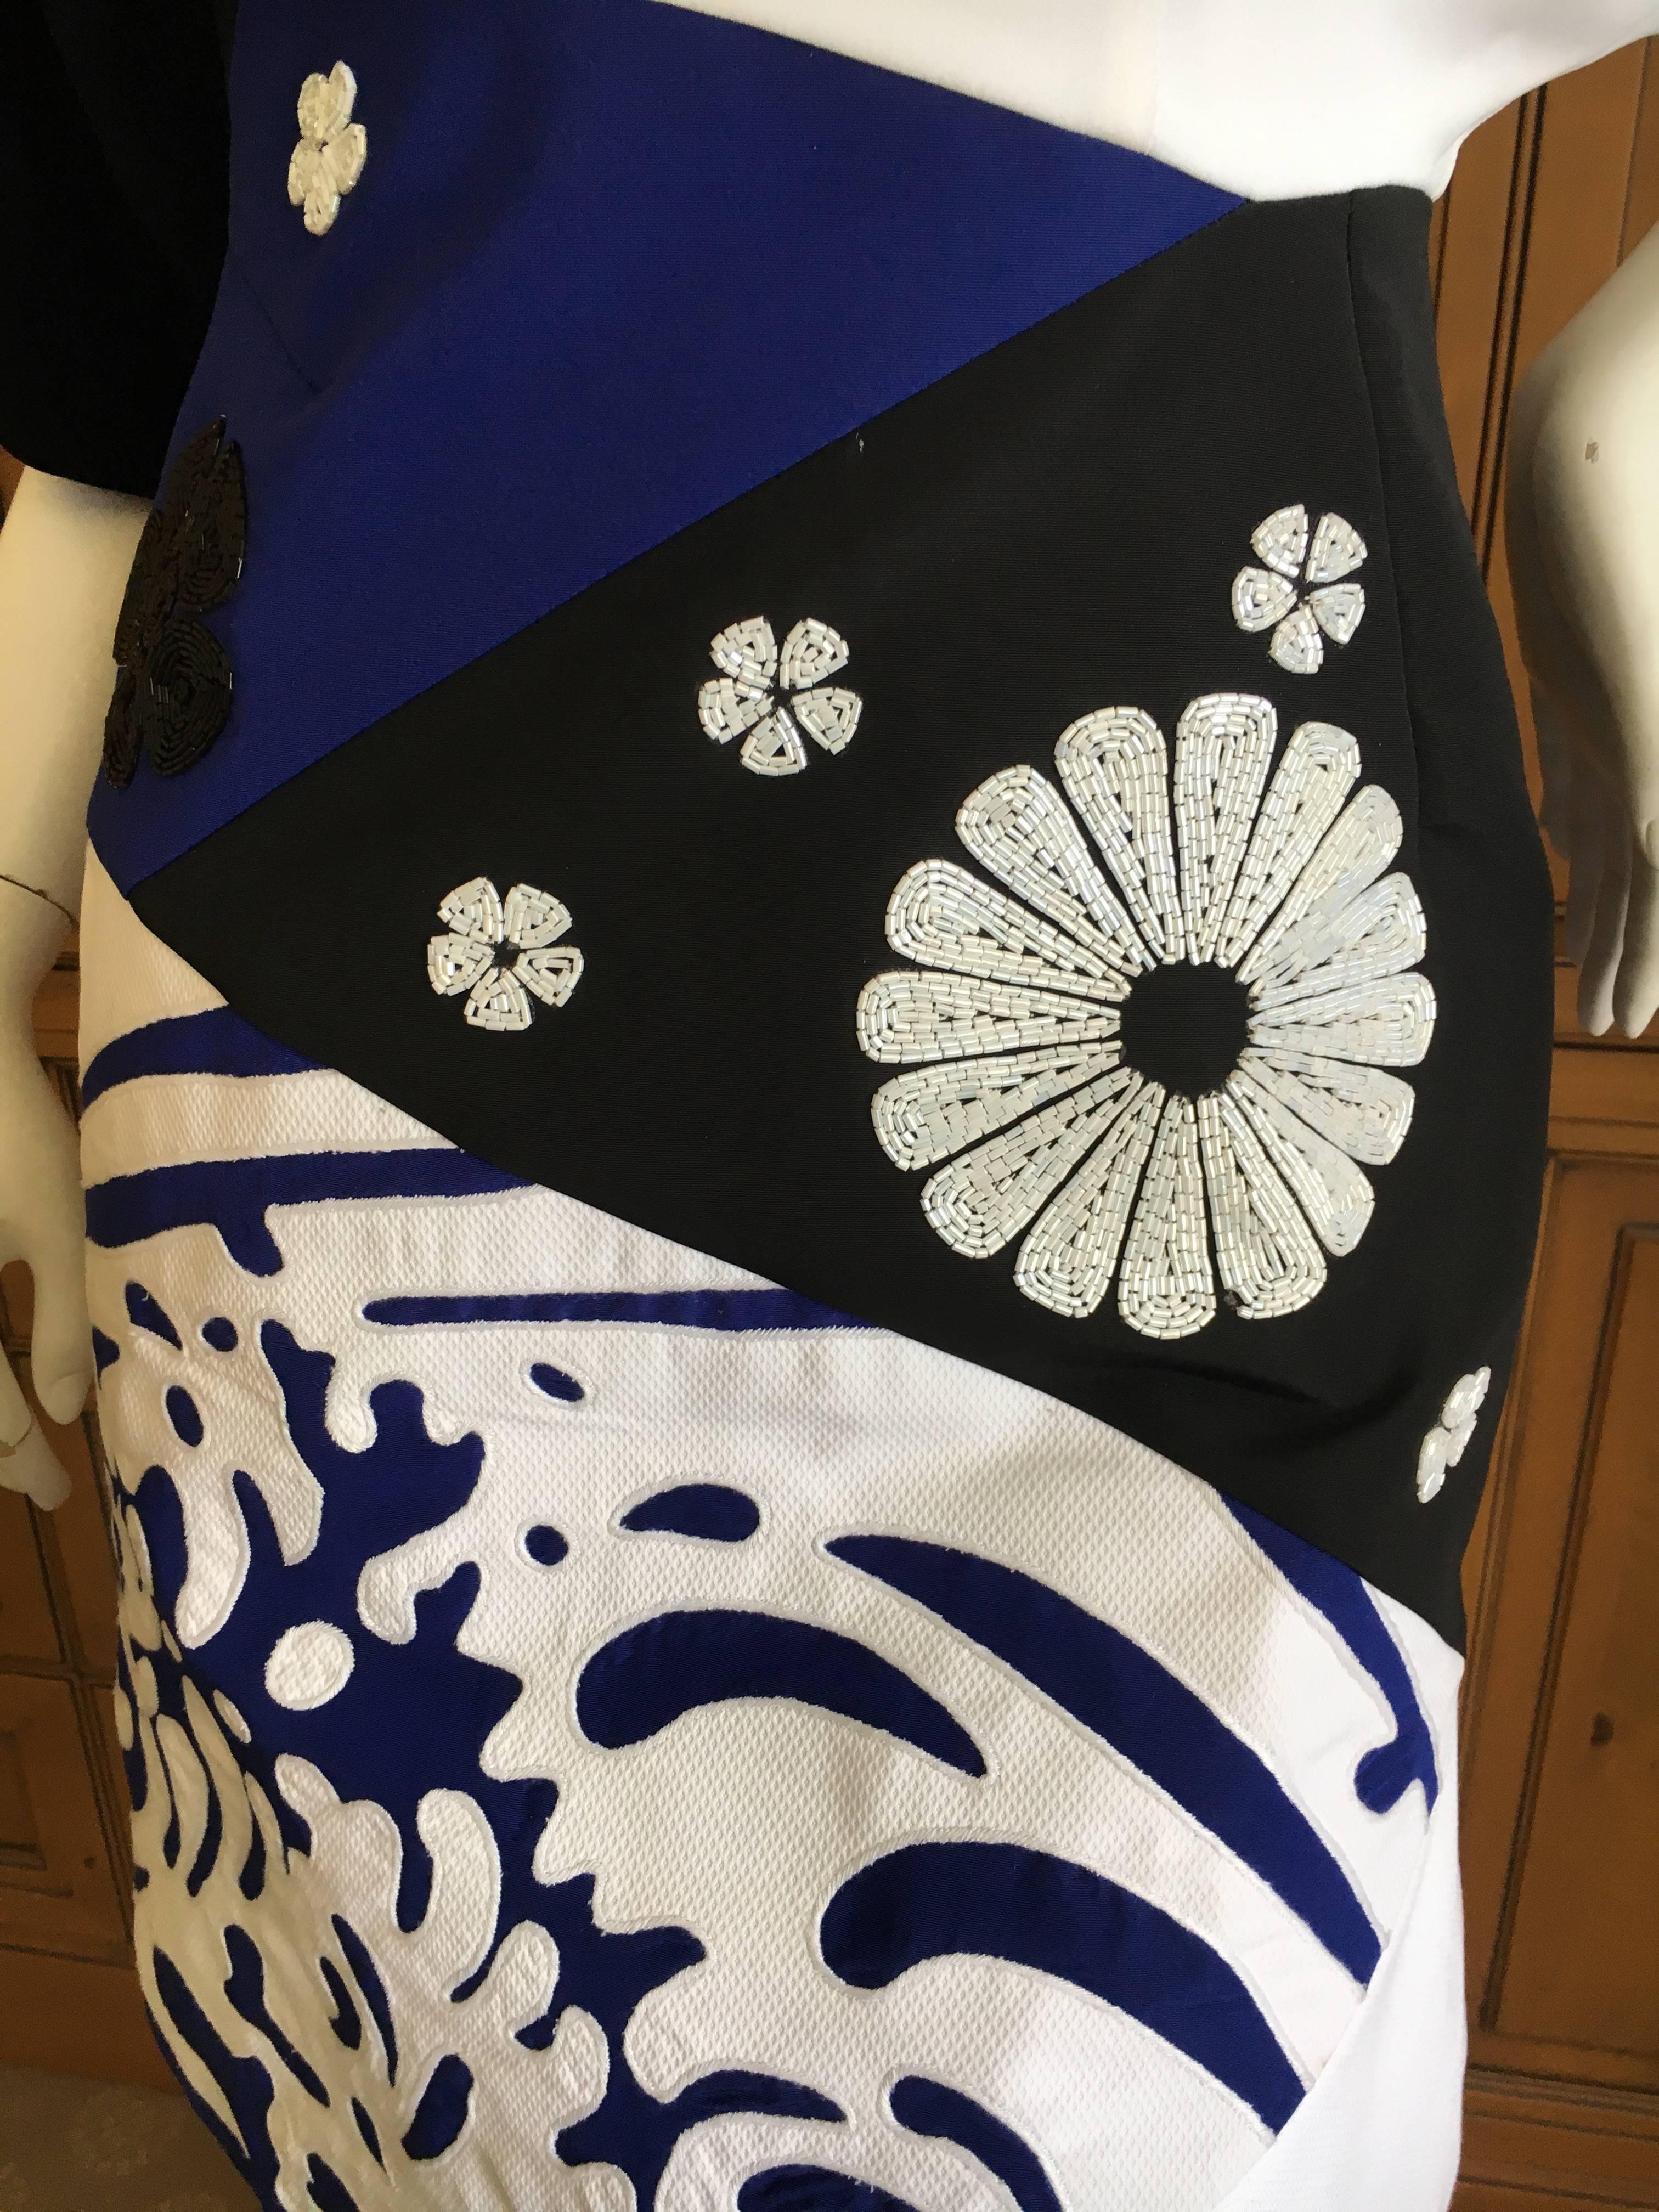 Andrew Gn Graphic Short Sleeve Dress, so reminiscent of Matisse cut outs.
Size 36
Bust 34"
Waist 28"
Hips 40"
Length 30"
There is a very faint spot, see last photo .